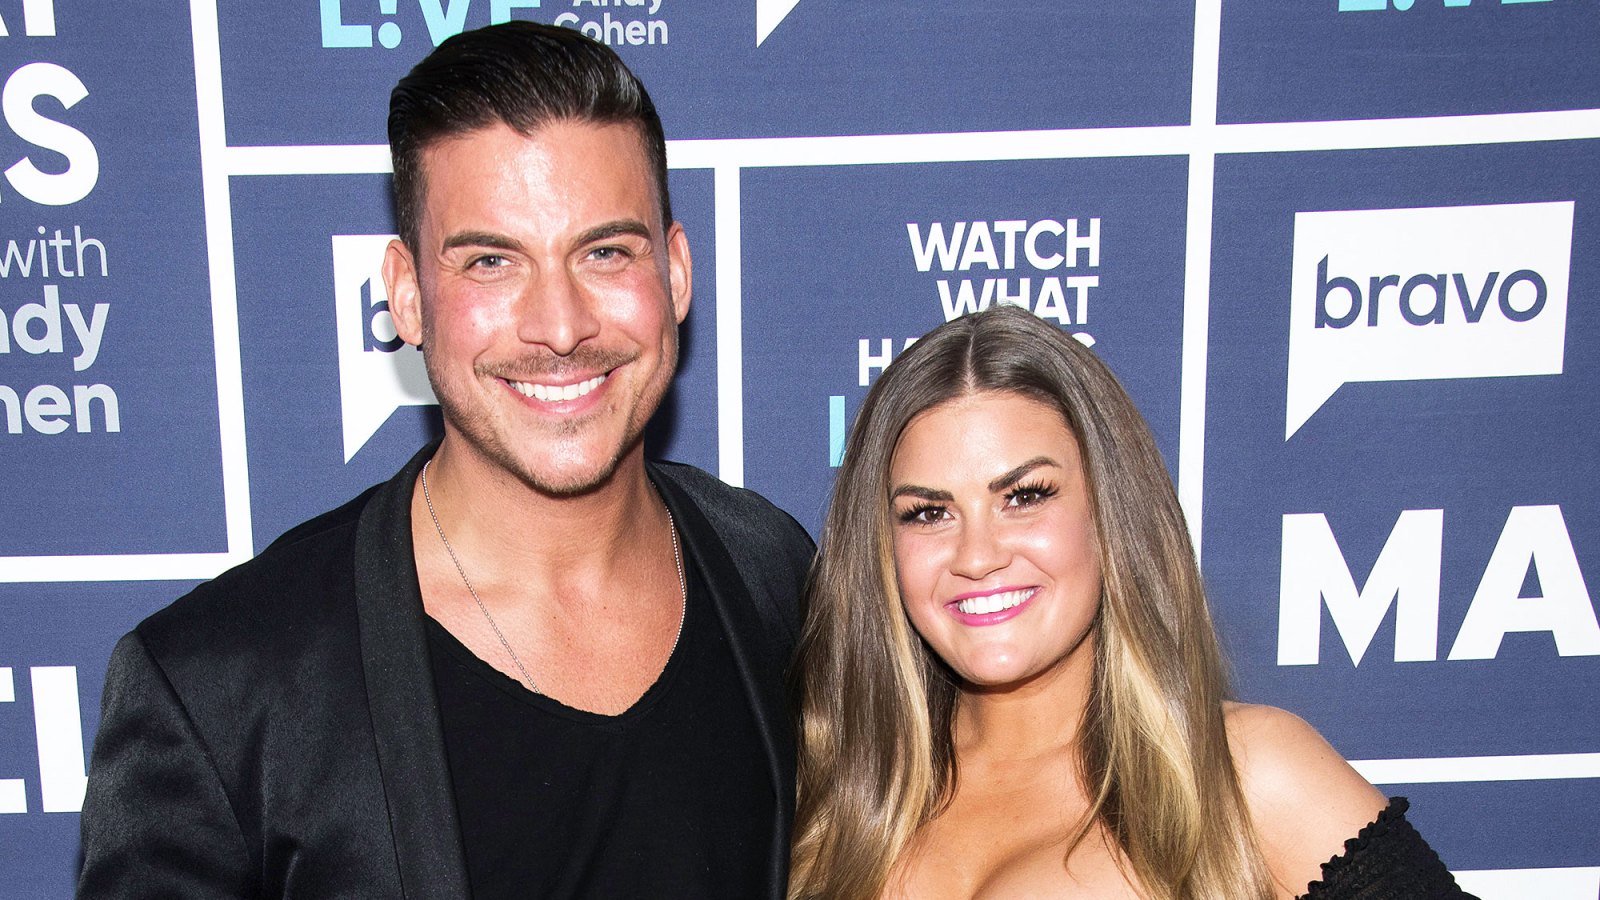 Jax Taylor and Brittany Cartwright Place Scale in Front of Their Refrigerator to Prevent Weight Gain While Quarantined